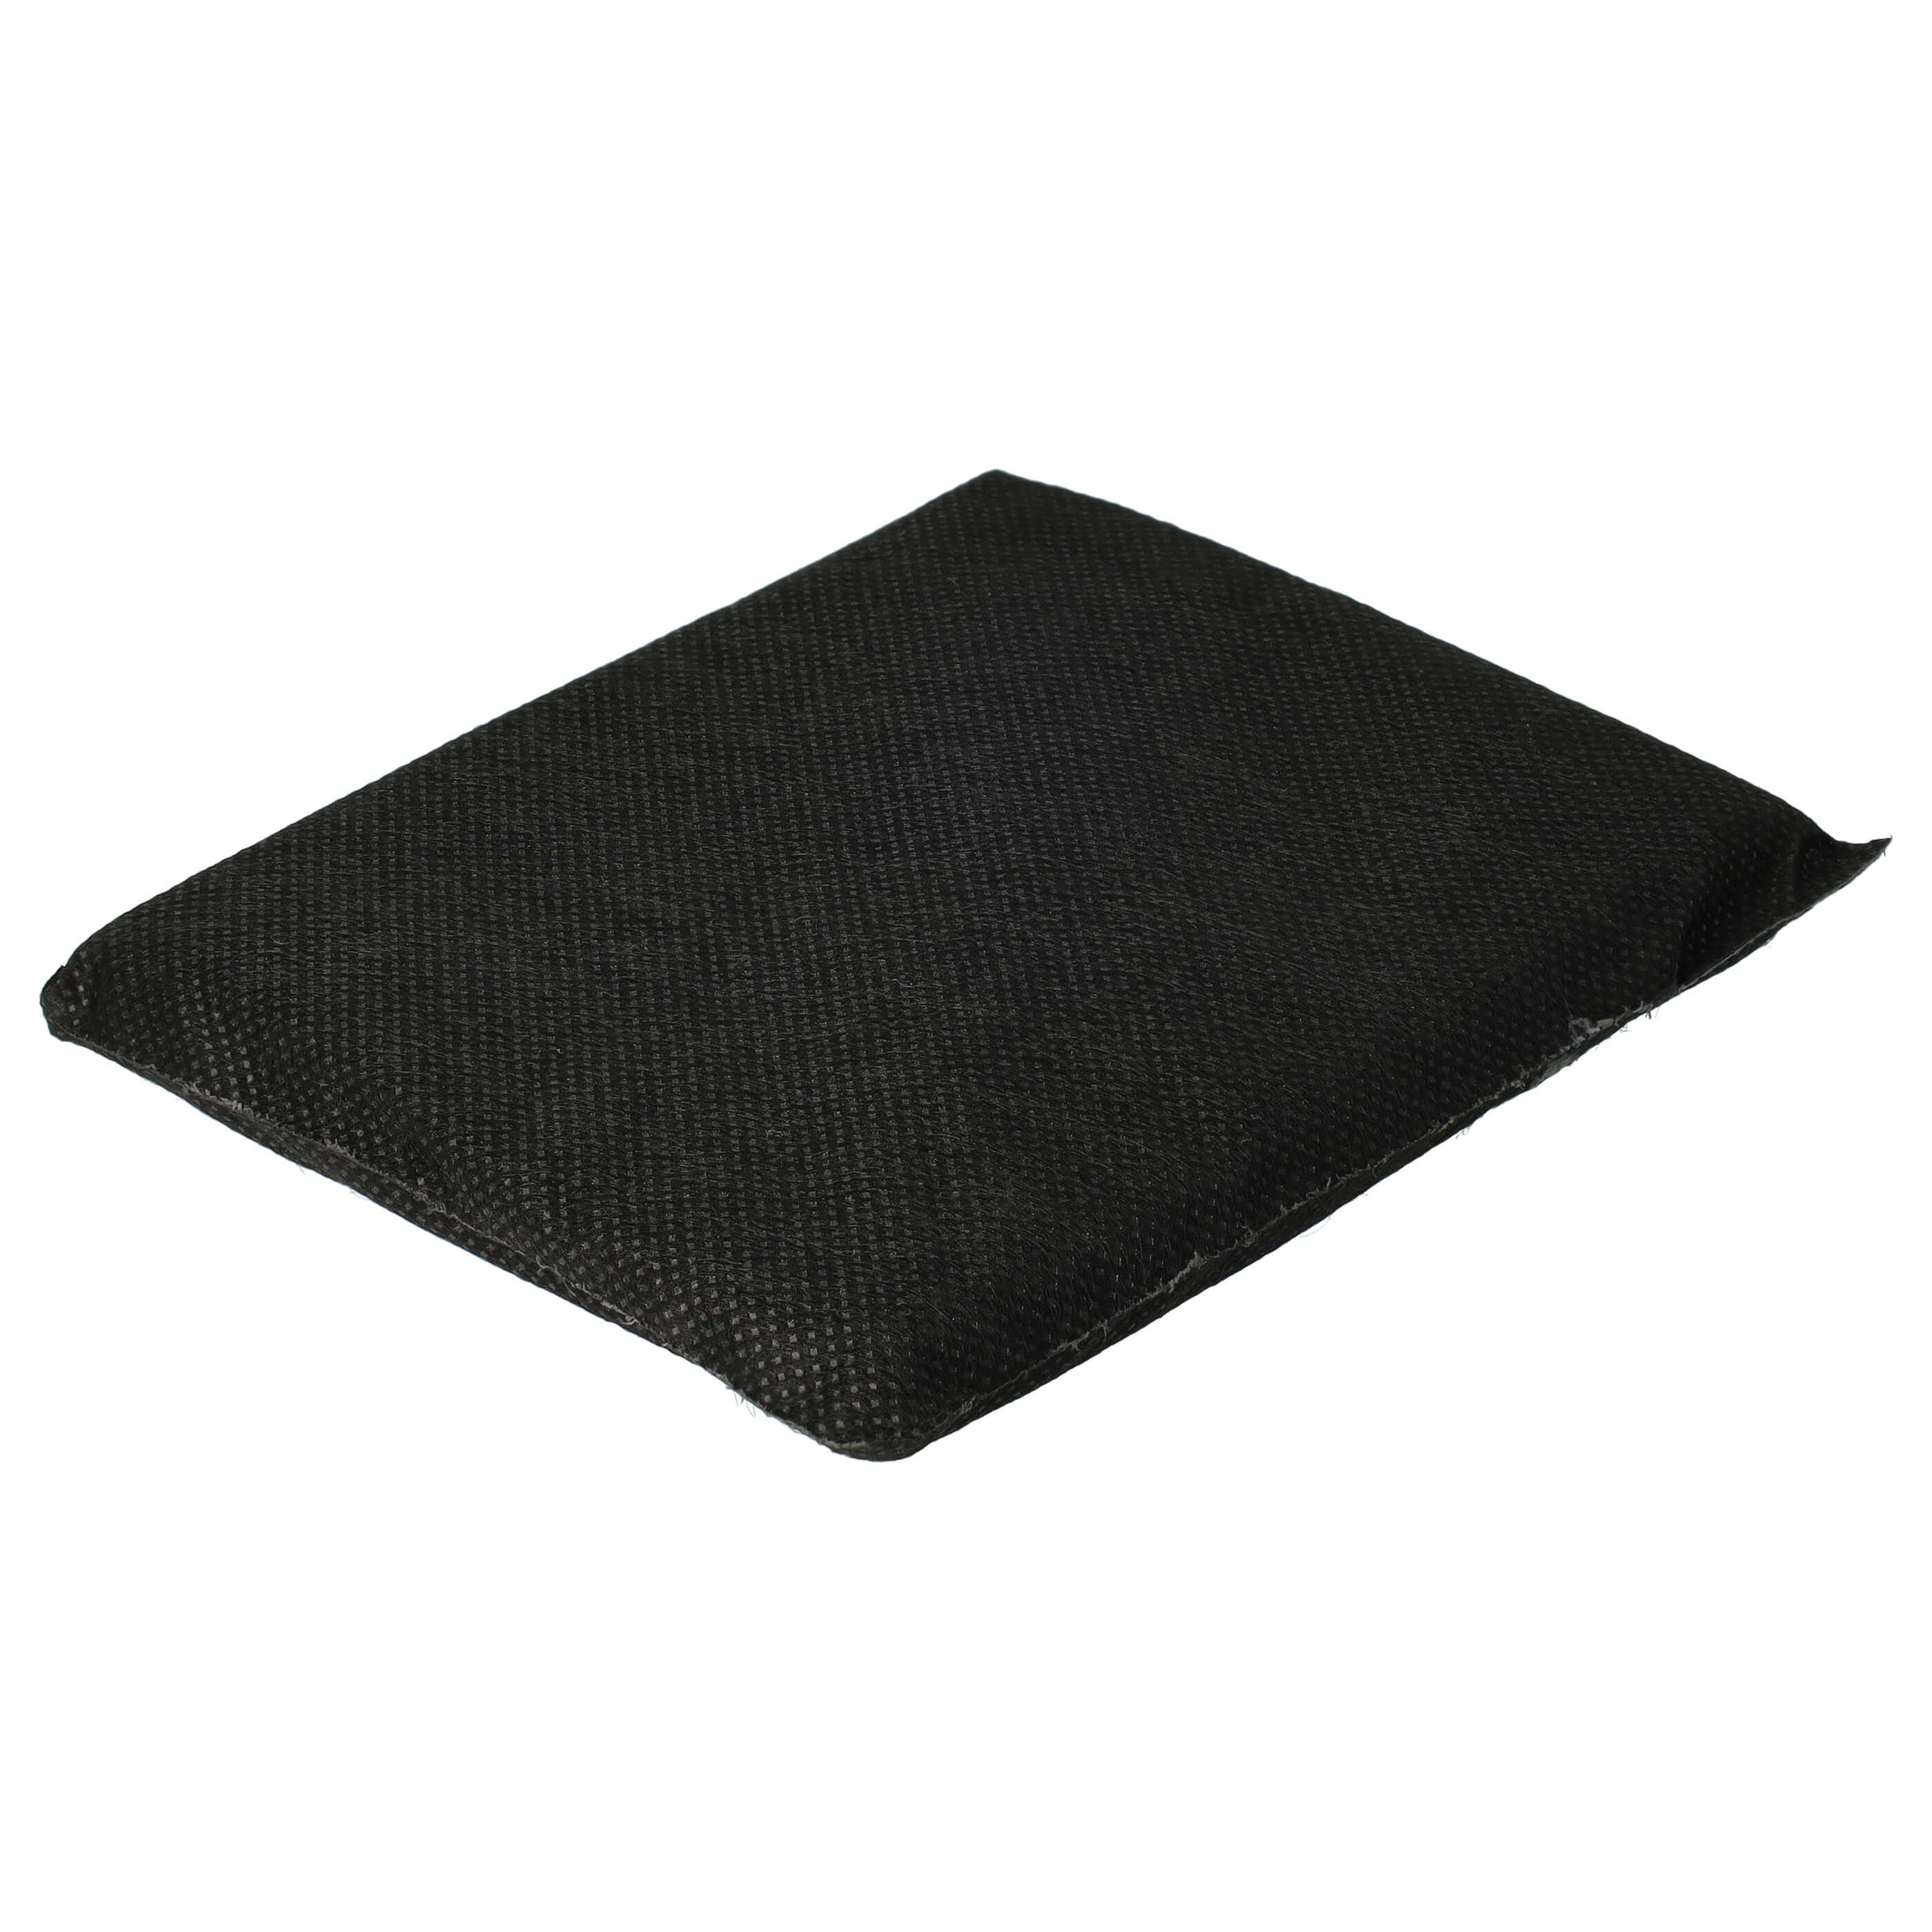 Air Filter replaces AEG/Electrolux 2081625036, 2081625010 for Juno Fridge - Activated Carbon